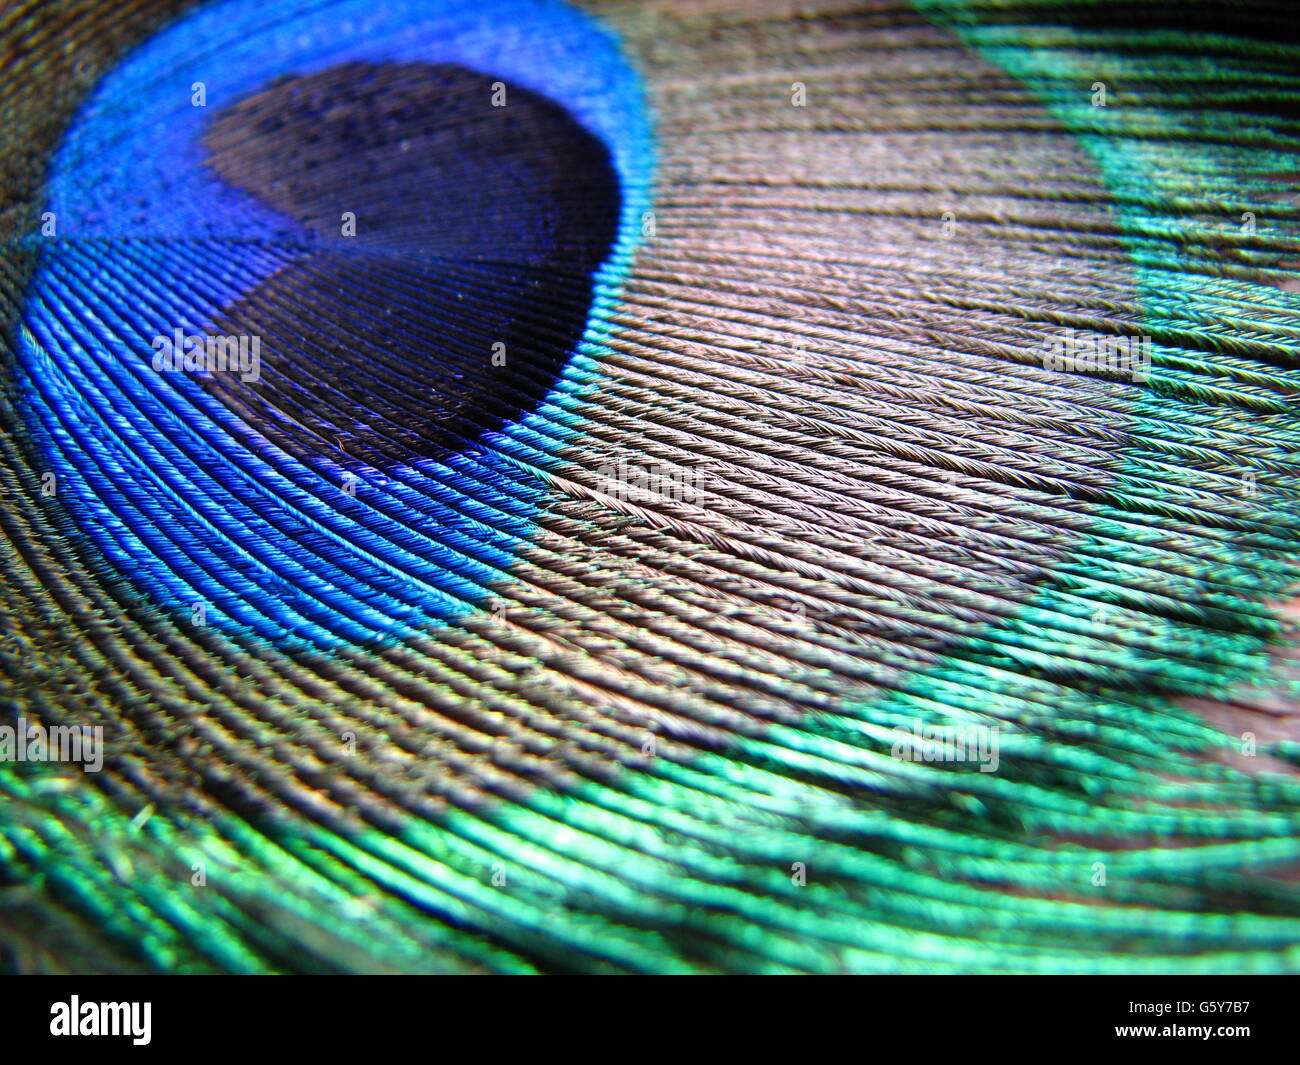 Peacock feather background Stock Photo